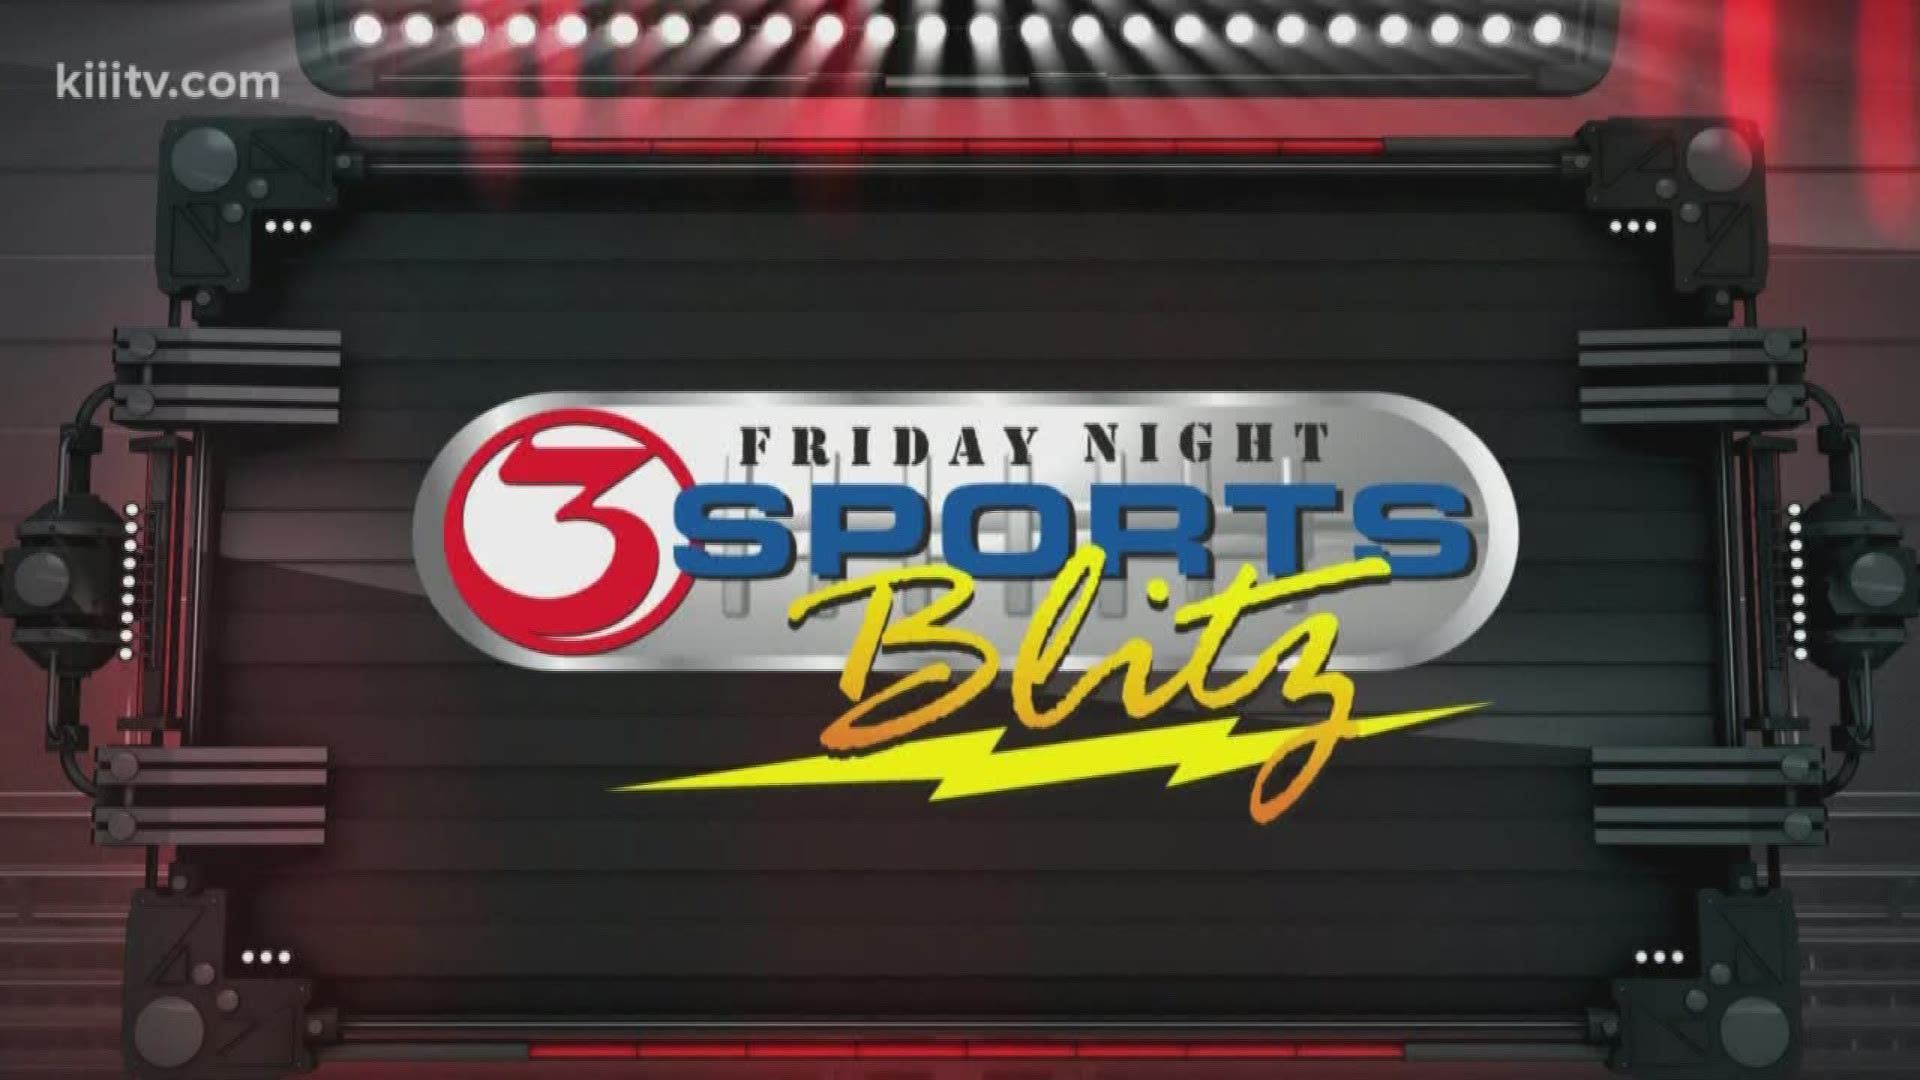 Blitz Week 2 - Part 3 includes highlights of:
- Hebbronville's win over San Diego 30-28
- London's win over Robstown 32-0
- Agua Dulce's win over Ben Bolt 19-14
- Riviera's win over Woodsboro 26-2
Plus, our rolling scoreboard featuring a performance from the Moody Trojans band!